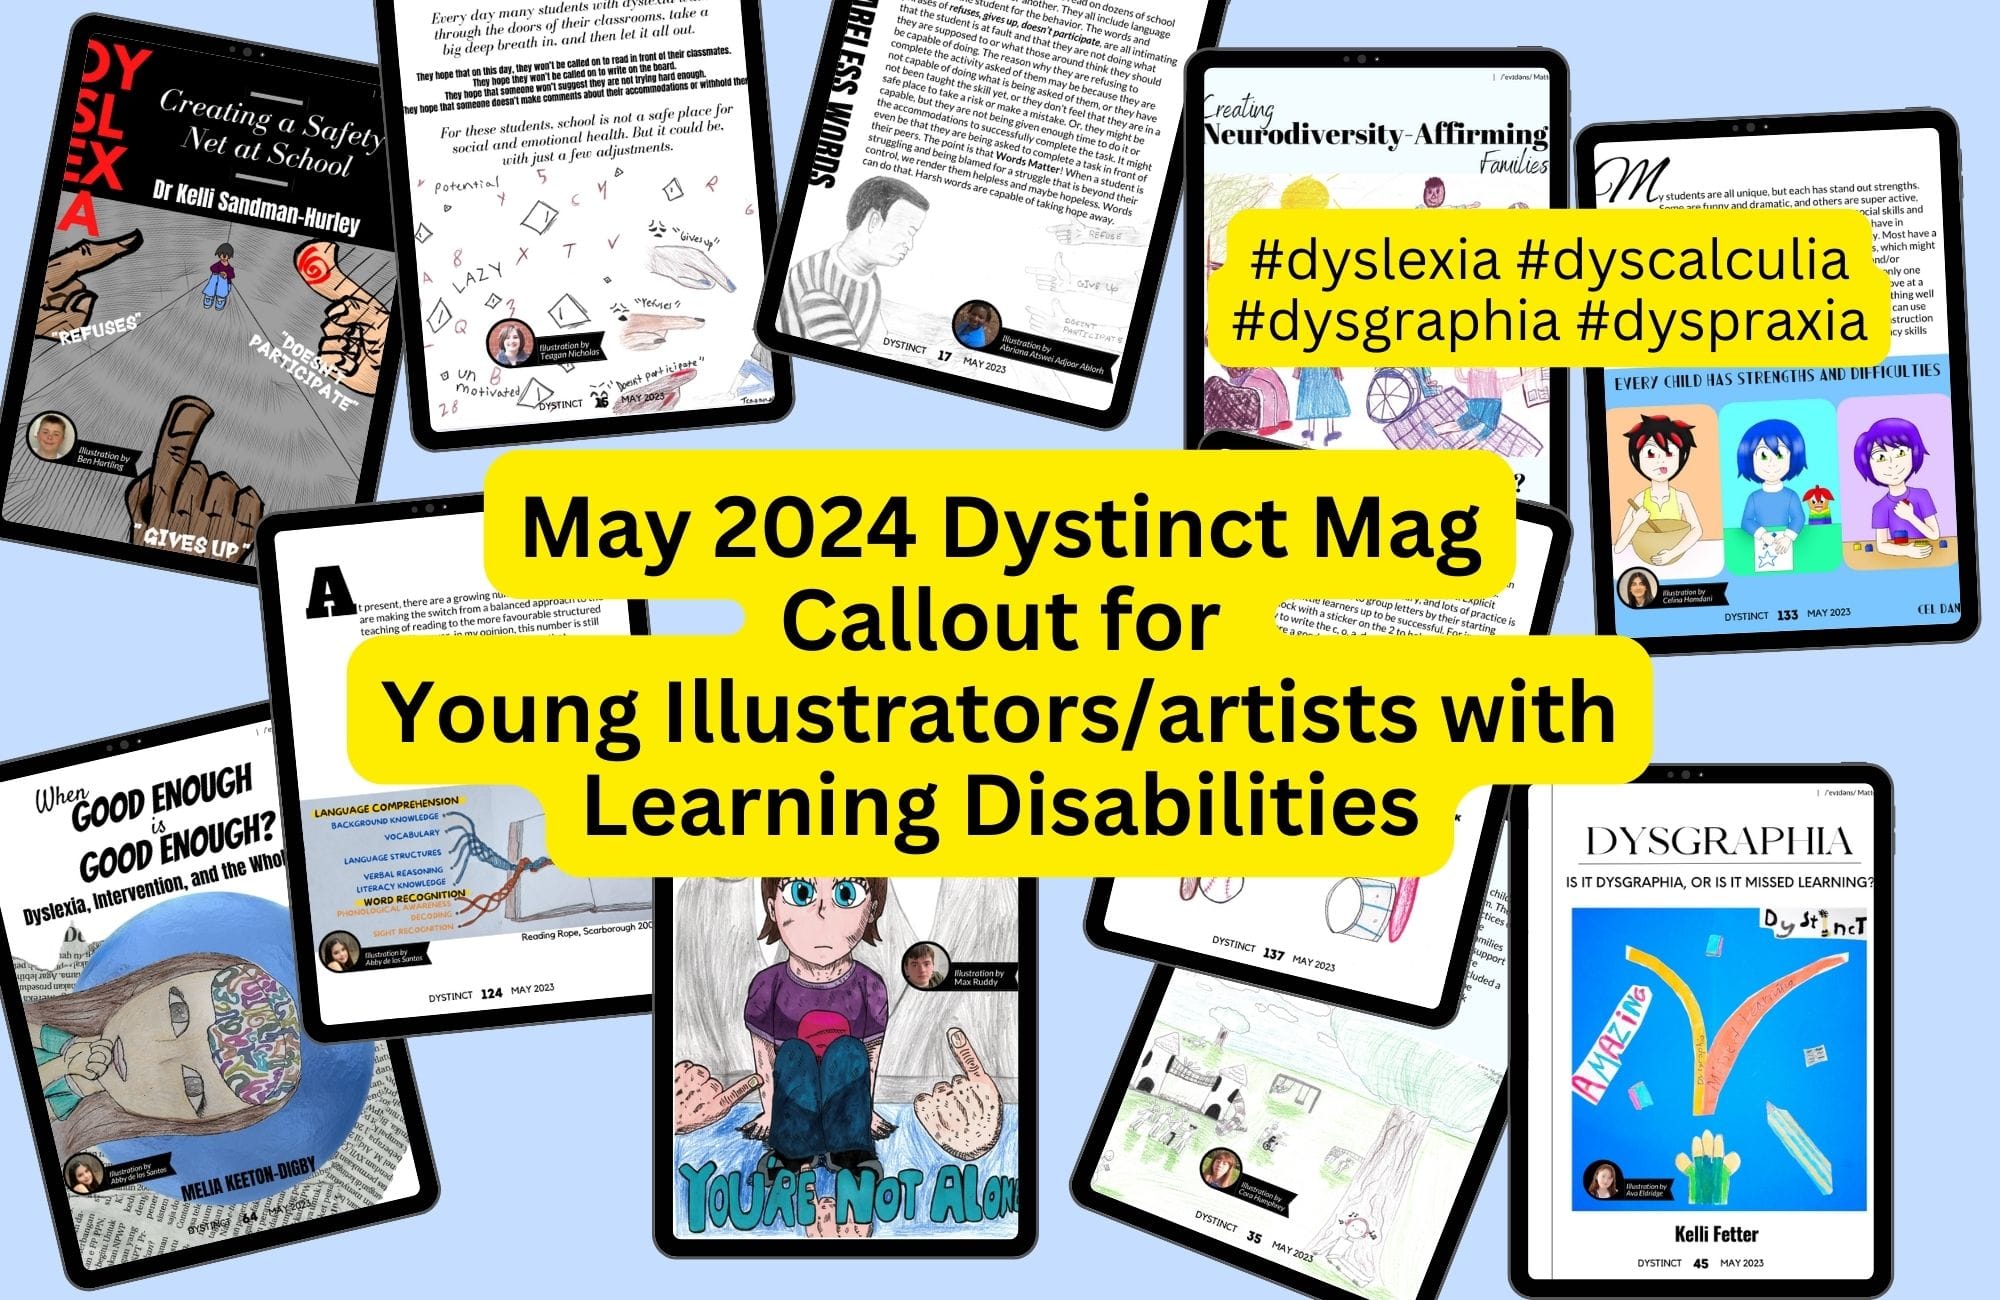 Issue 21: Illustration Callout for May 2024 Dystinct Magazine